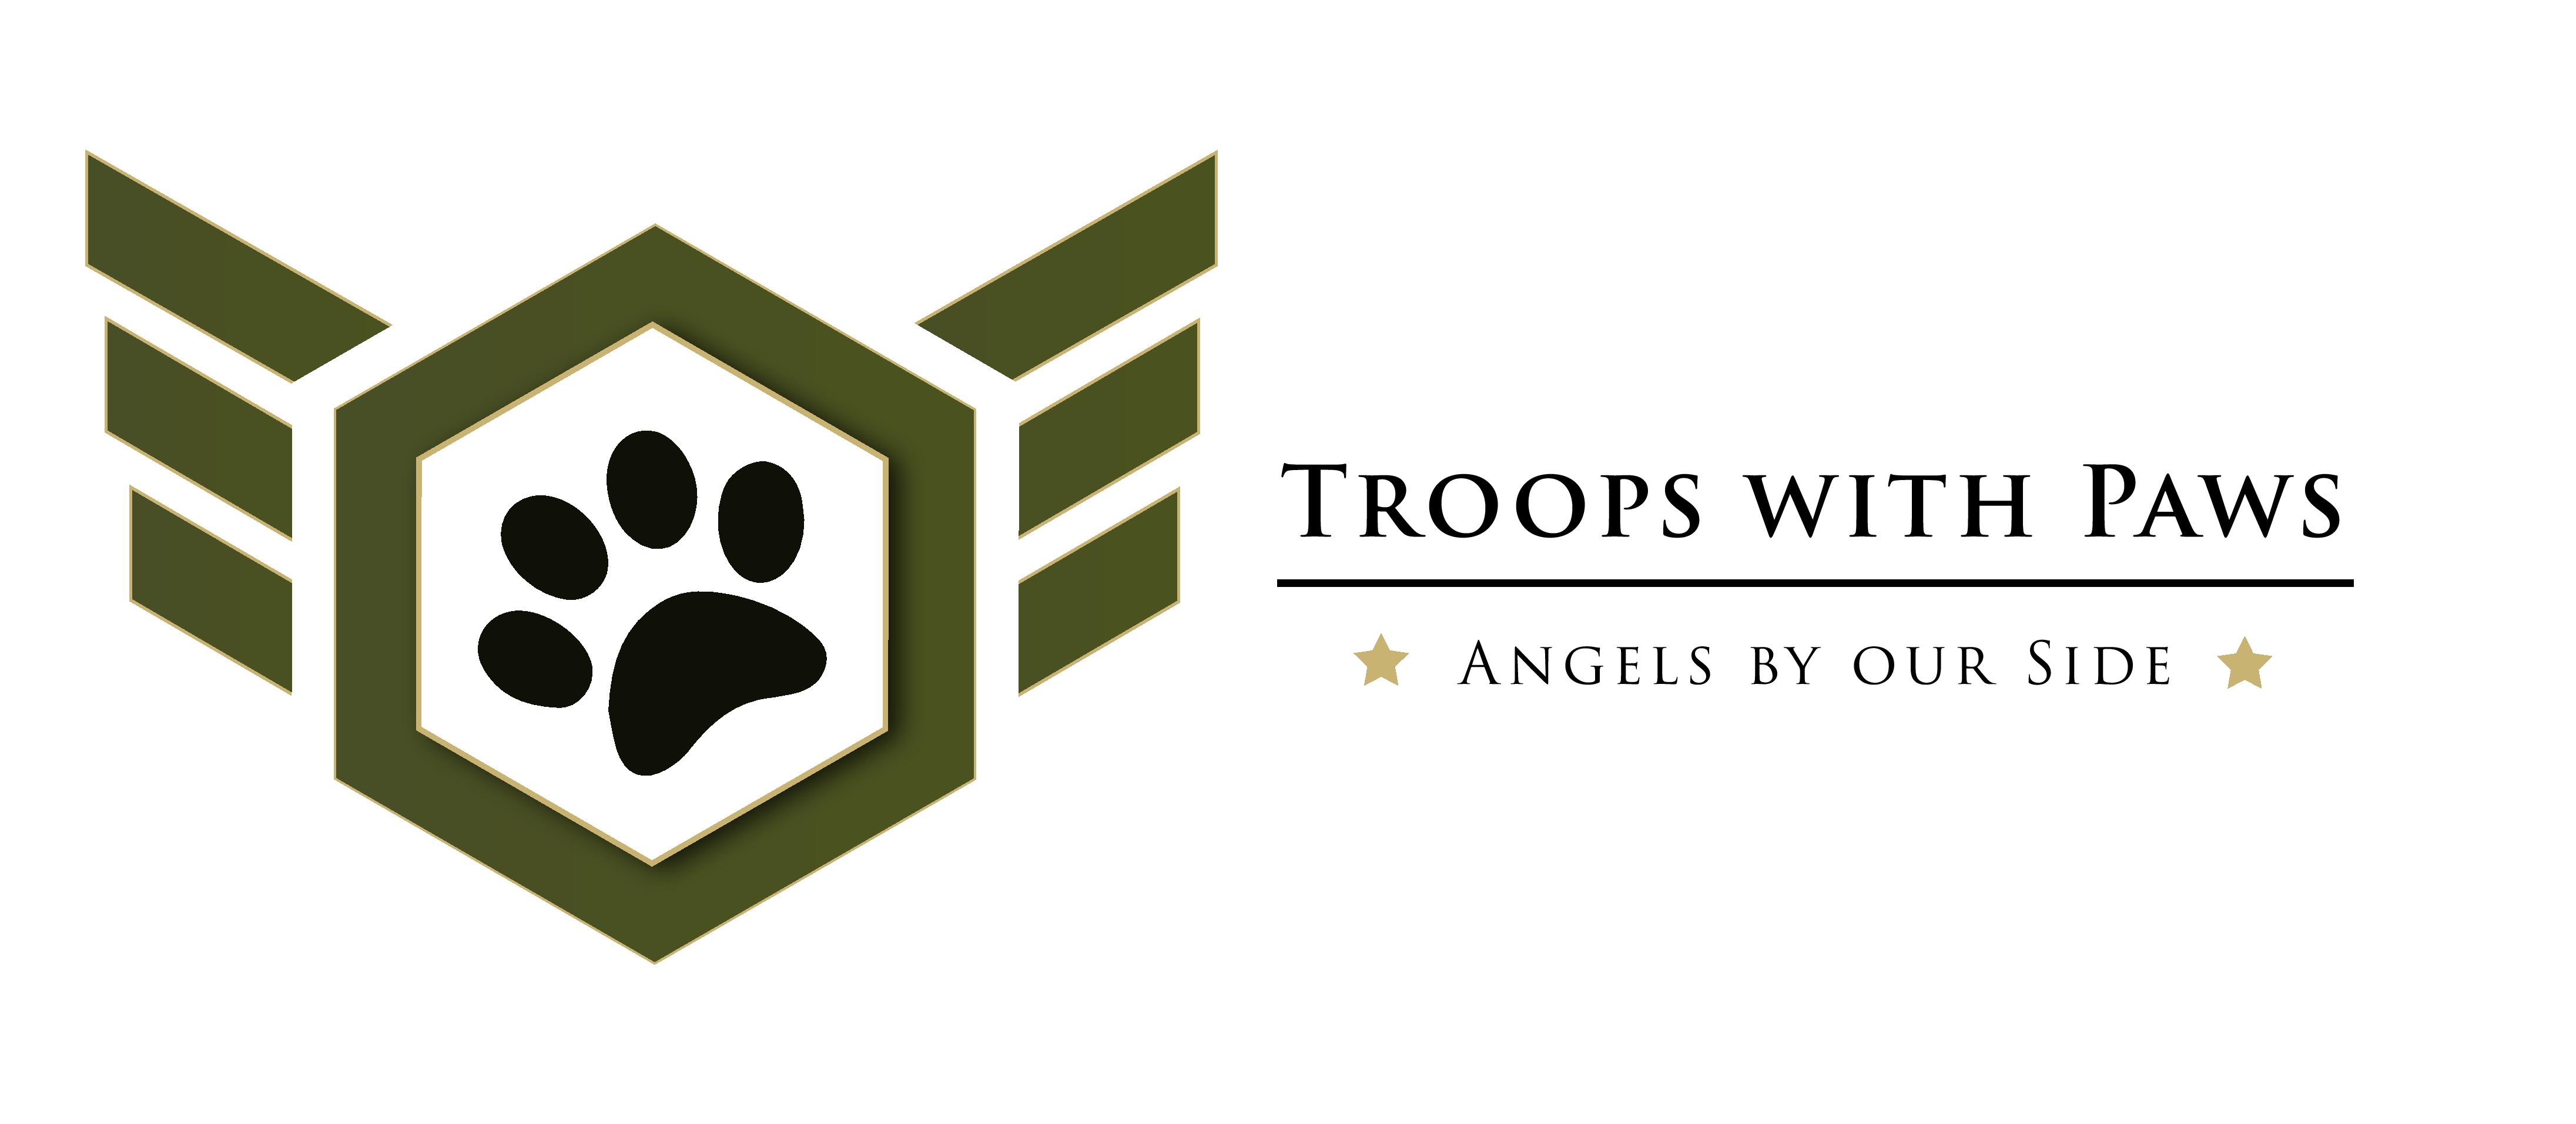 TROOPS WITH PAWS logo